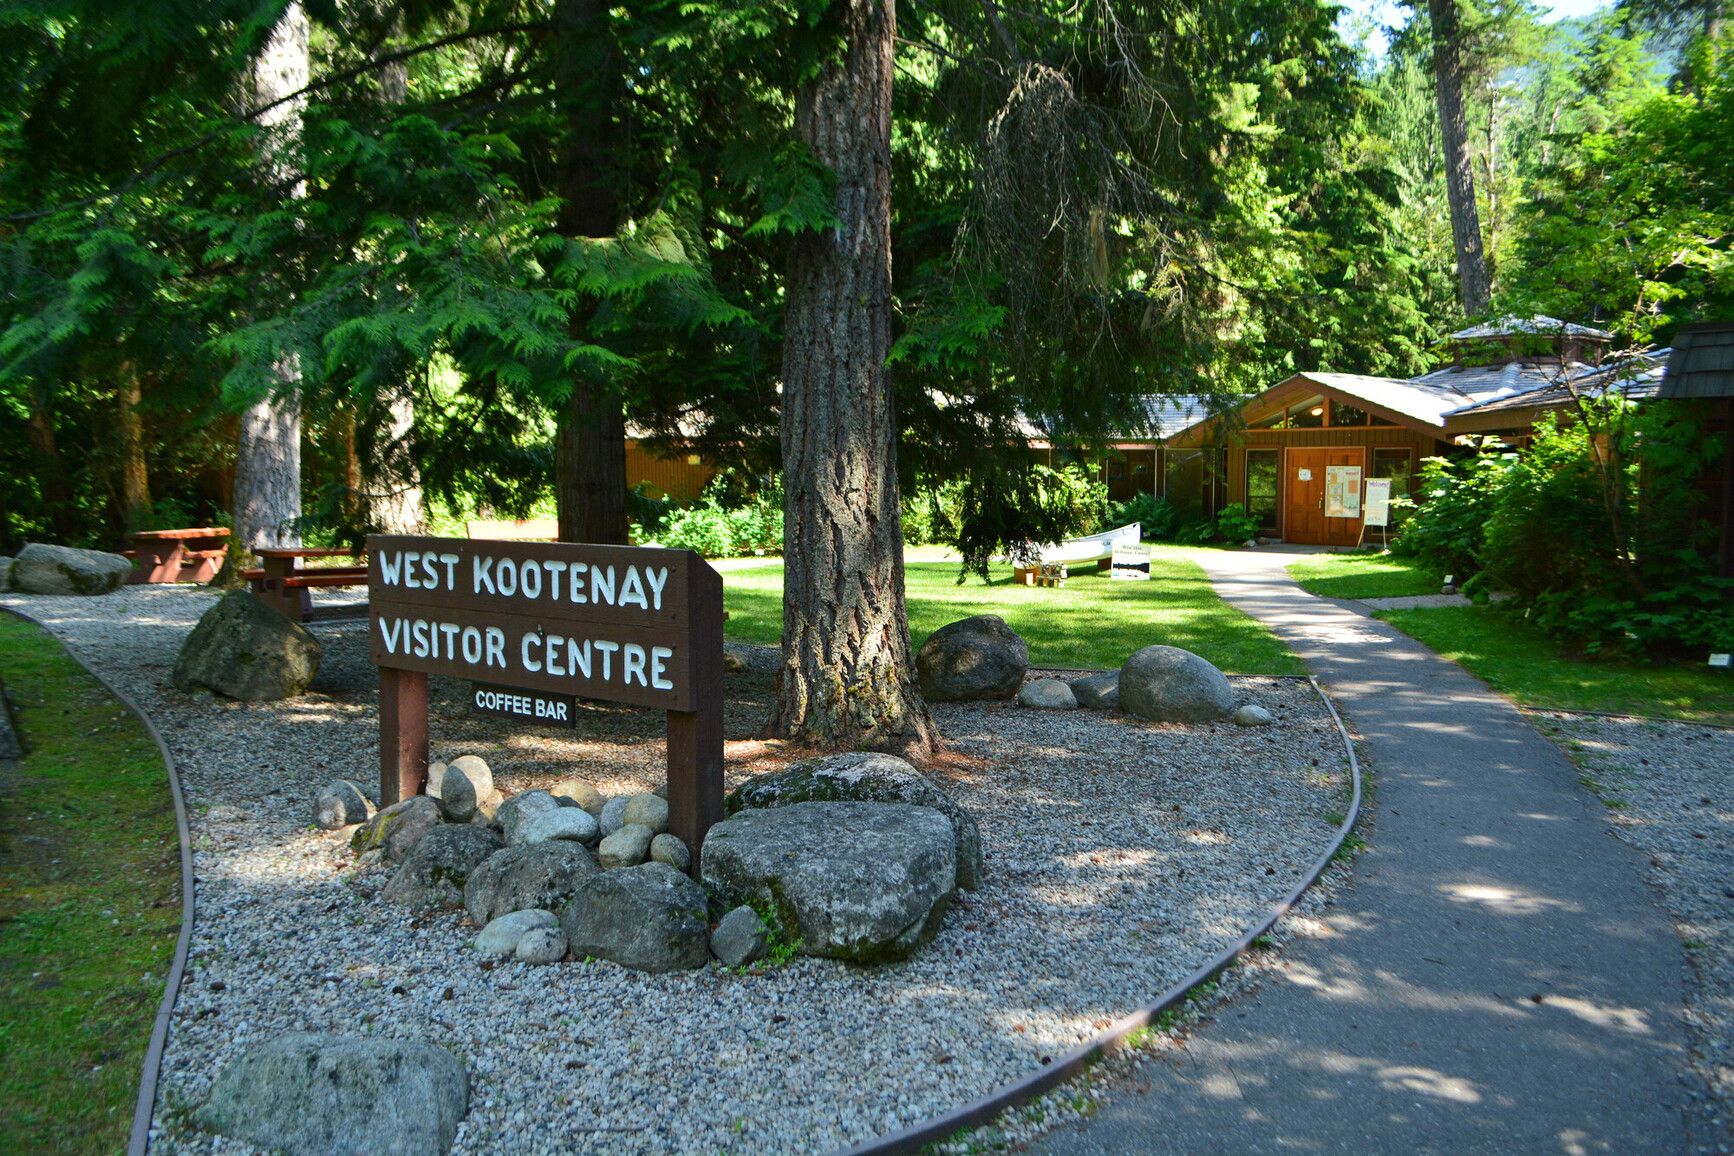 The West Kootenay Visitor Centre serves as a hub for tourists and locals alike, providing information about attractions, activities, and amenities in the West Kootenay region.